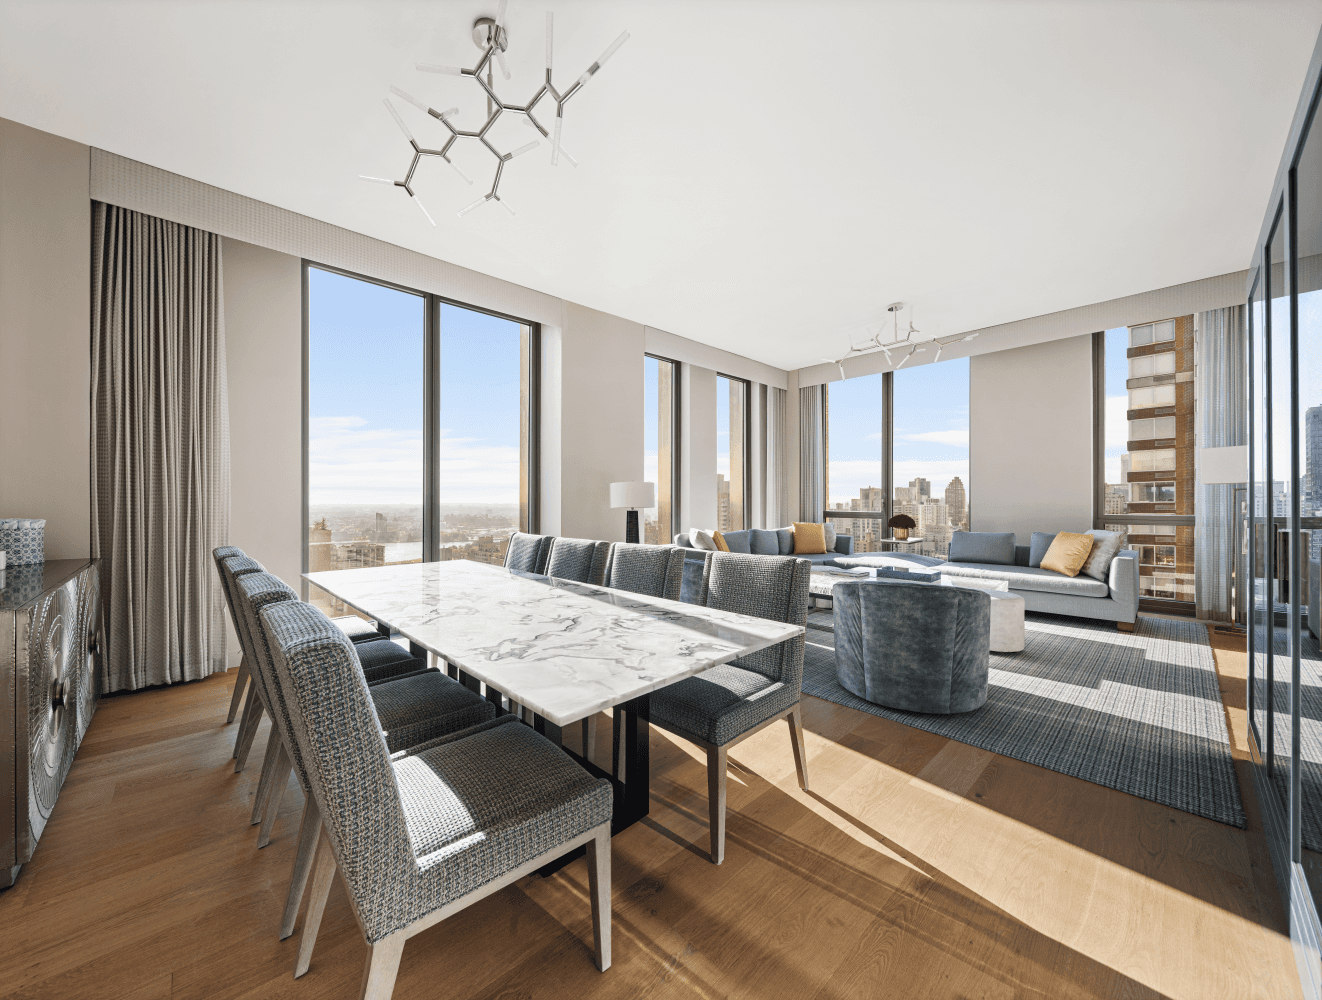 Perched high on the 31st floor, a walnut entry door and a white oak foyer welcome you to this luxurious residence featuring three bedrooms, three baths and a powder room.